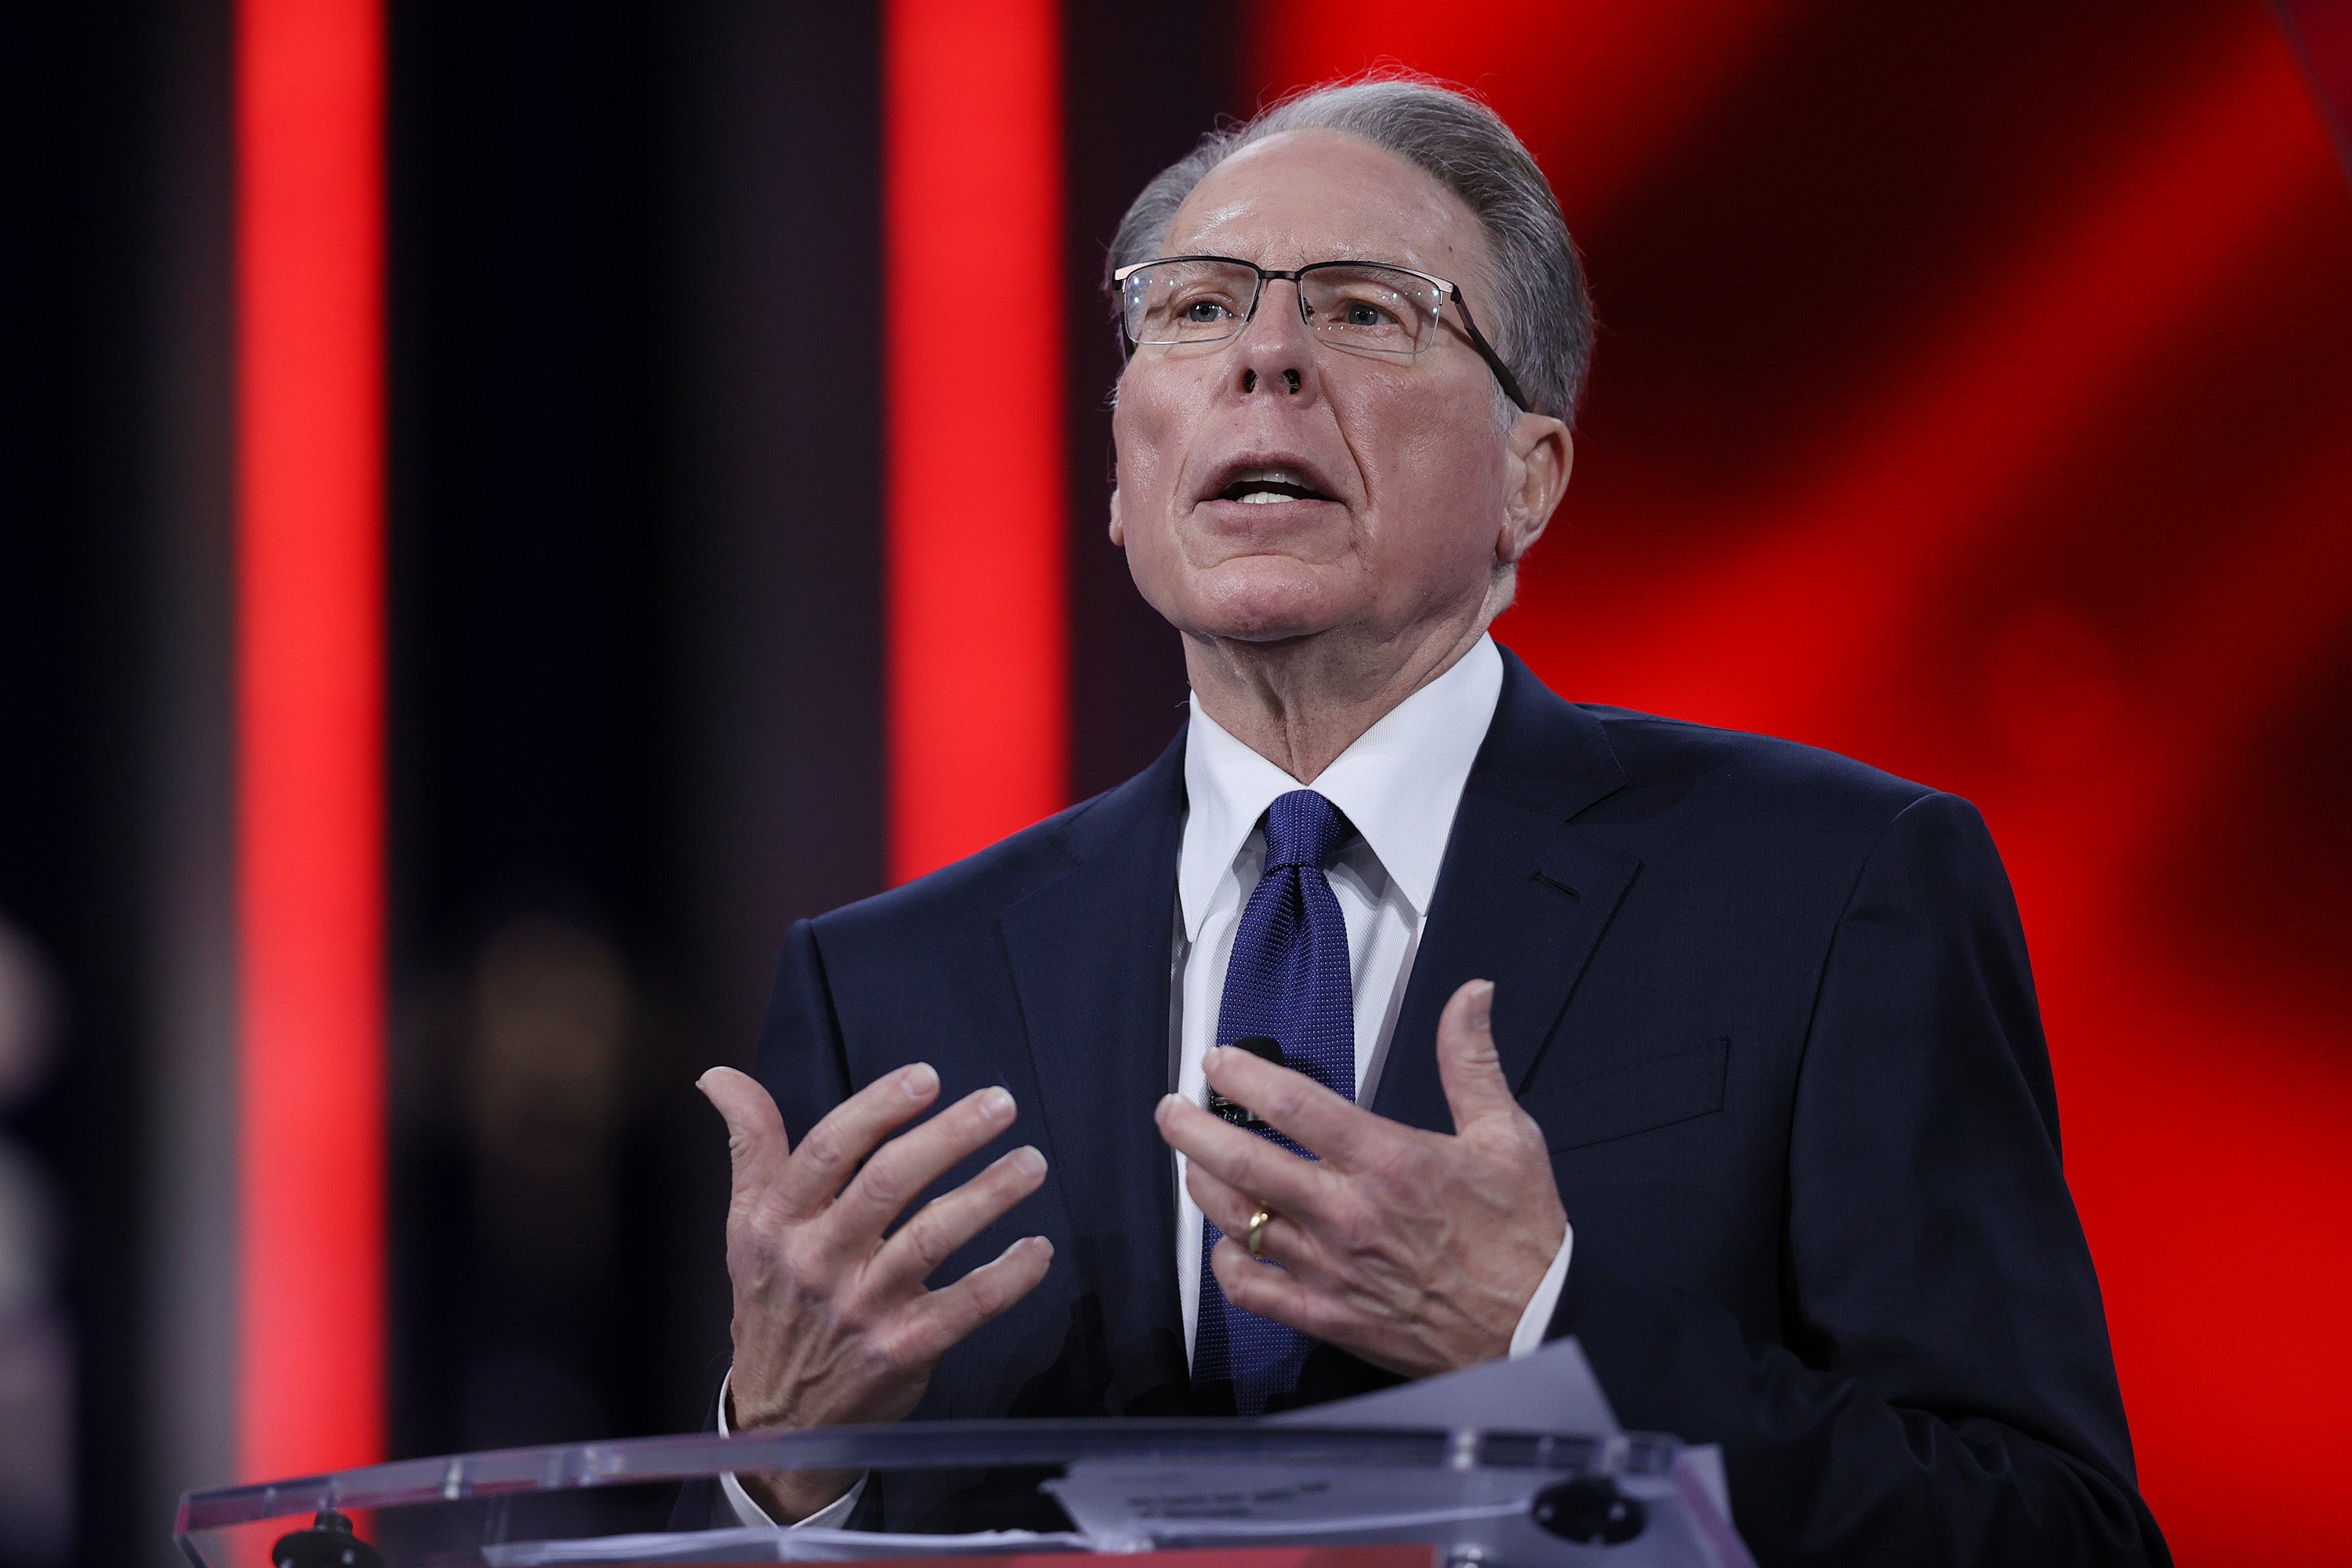 Wayne LaPierre, of the National Rifle Association, addresses the Conservative Political Action Conference held in the Hyatt Regency on February 28, 2021 in Orlando, Florida.